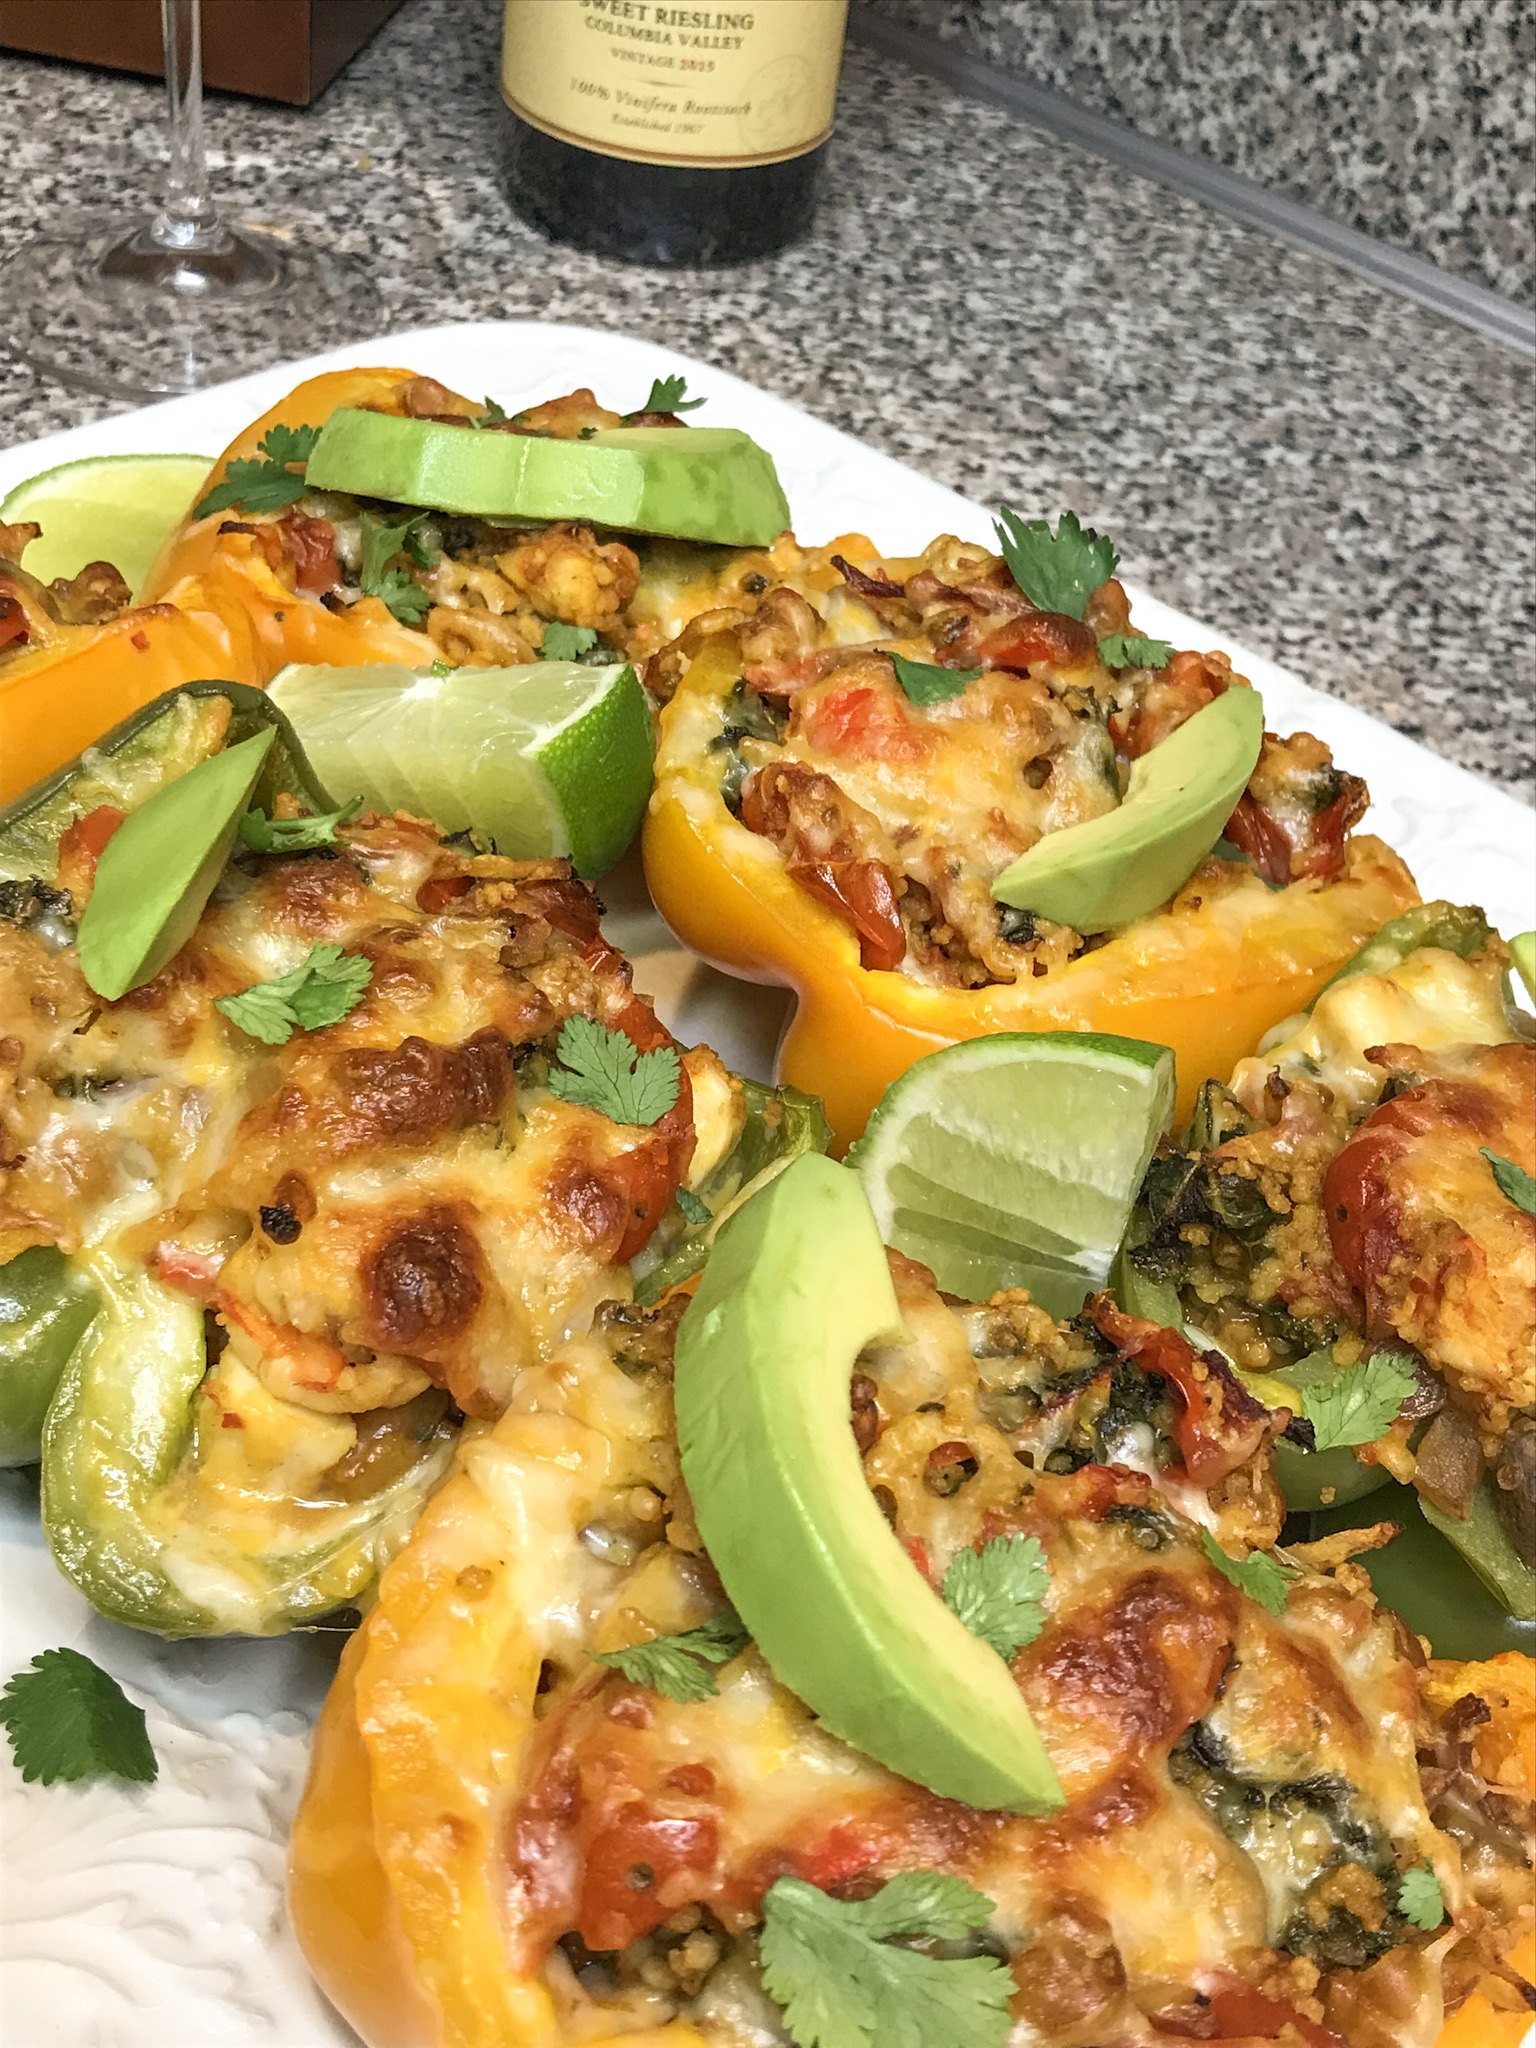 Shrimp and scallop stuffed peppers